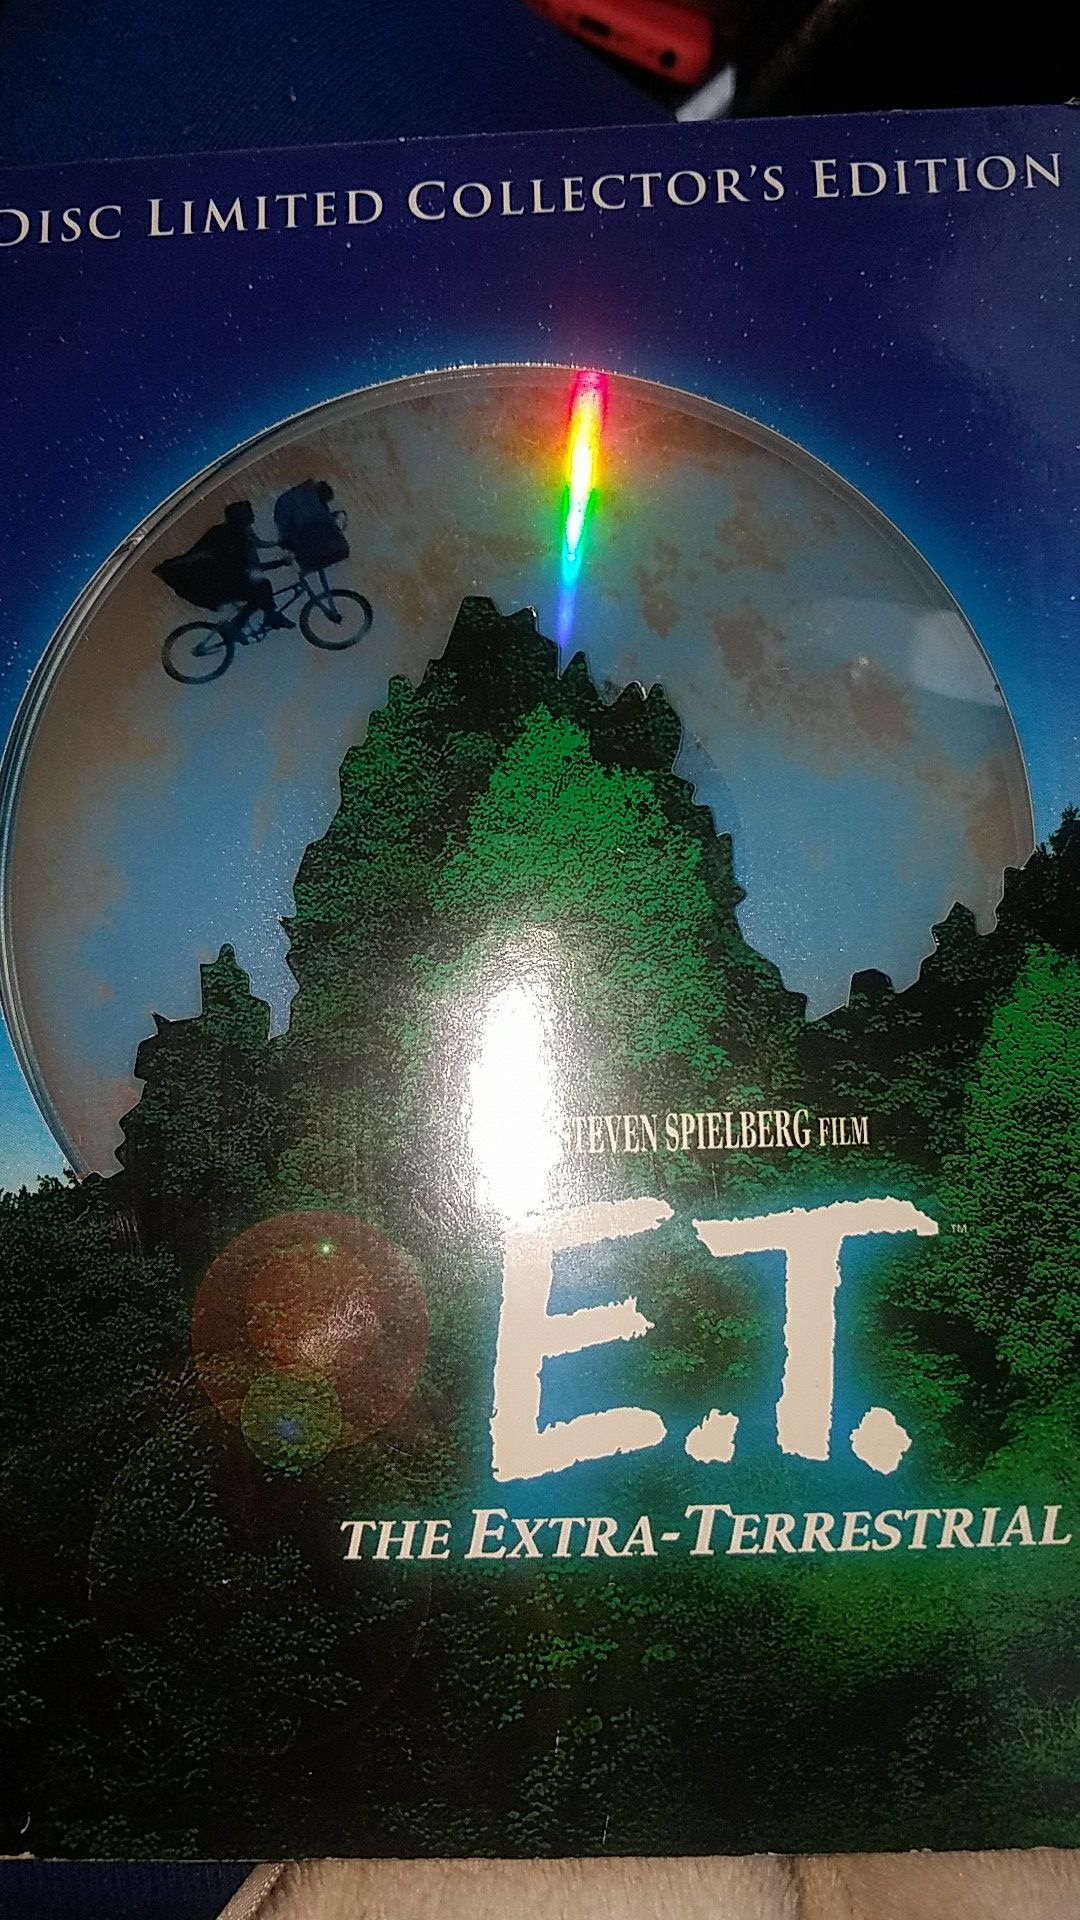 E.T. The Extra-Terrestial 2 Disc Collectors Edition